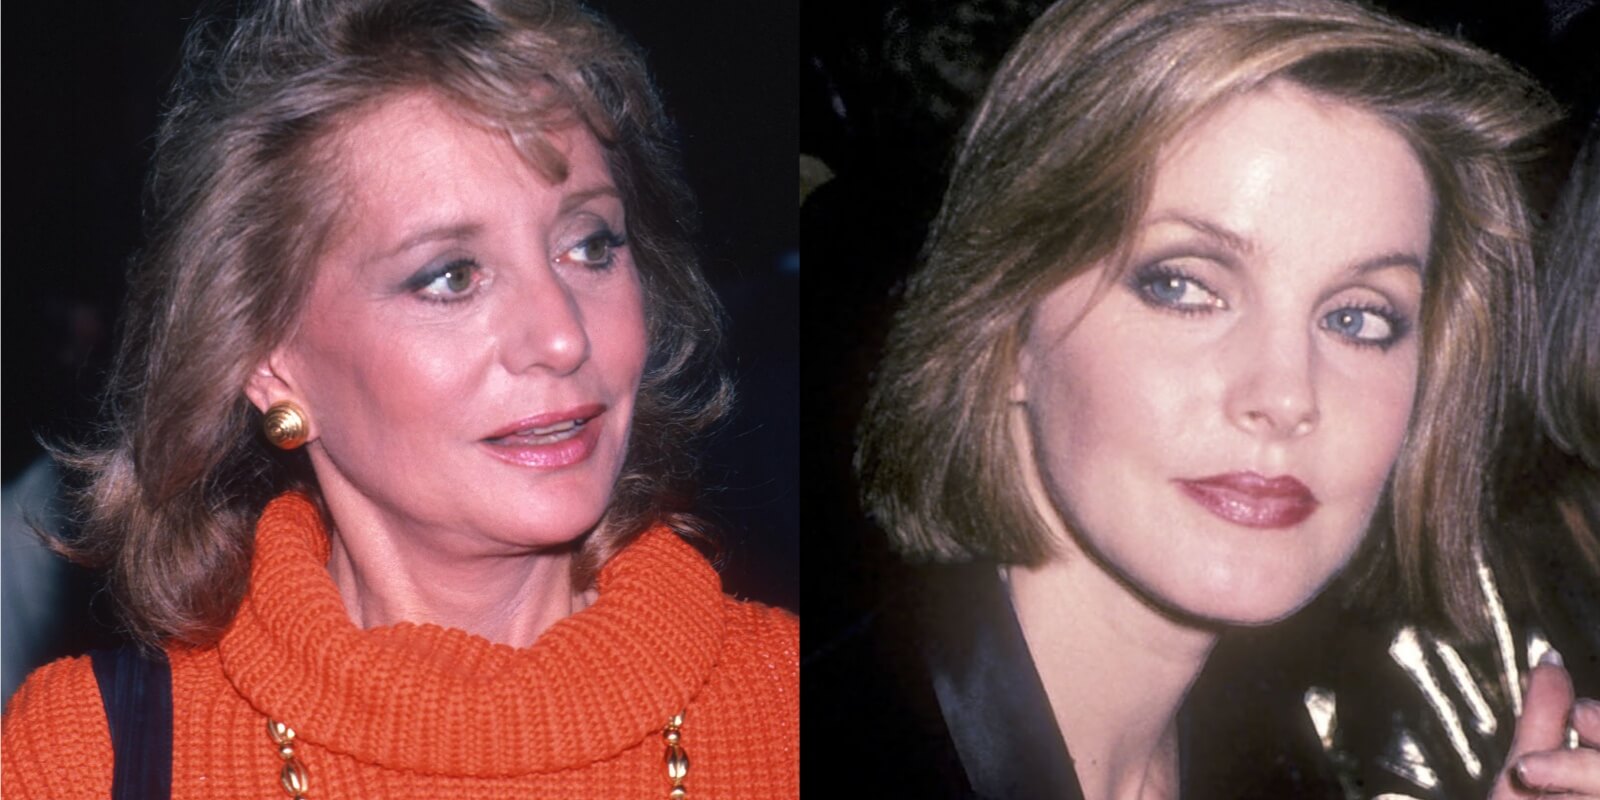 Barbara Walters and Priscilla Presley in side by side photographs taken in 1985.